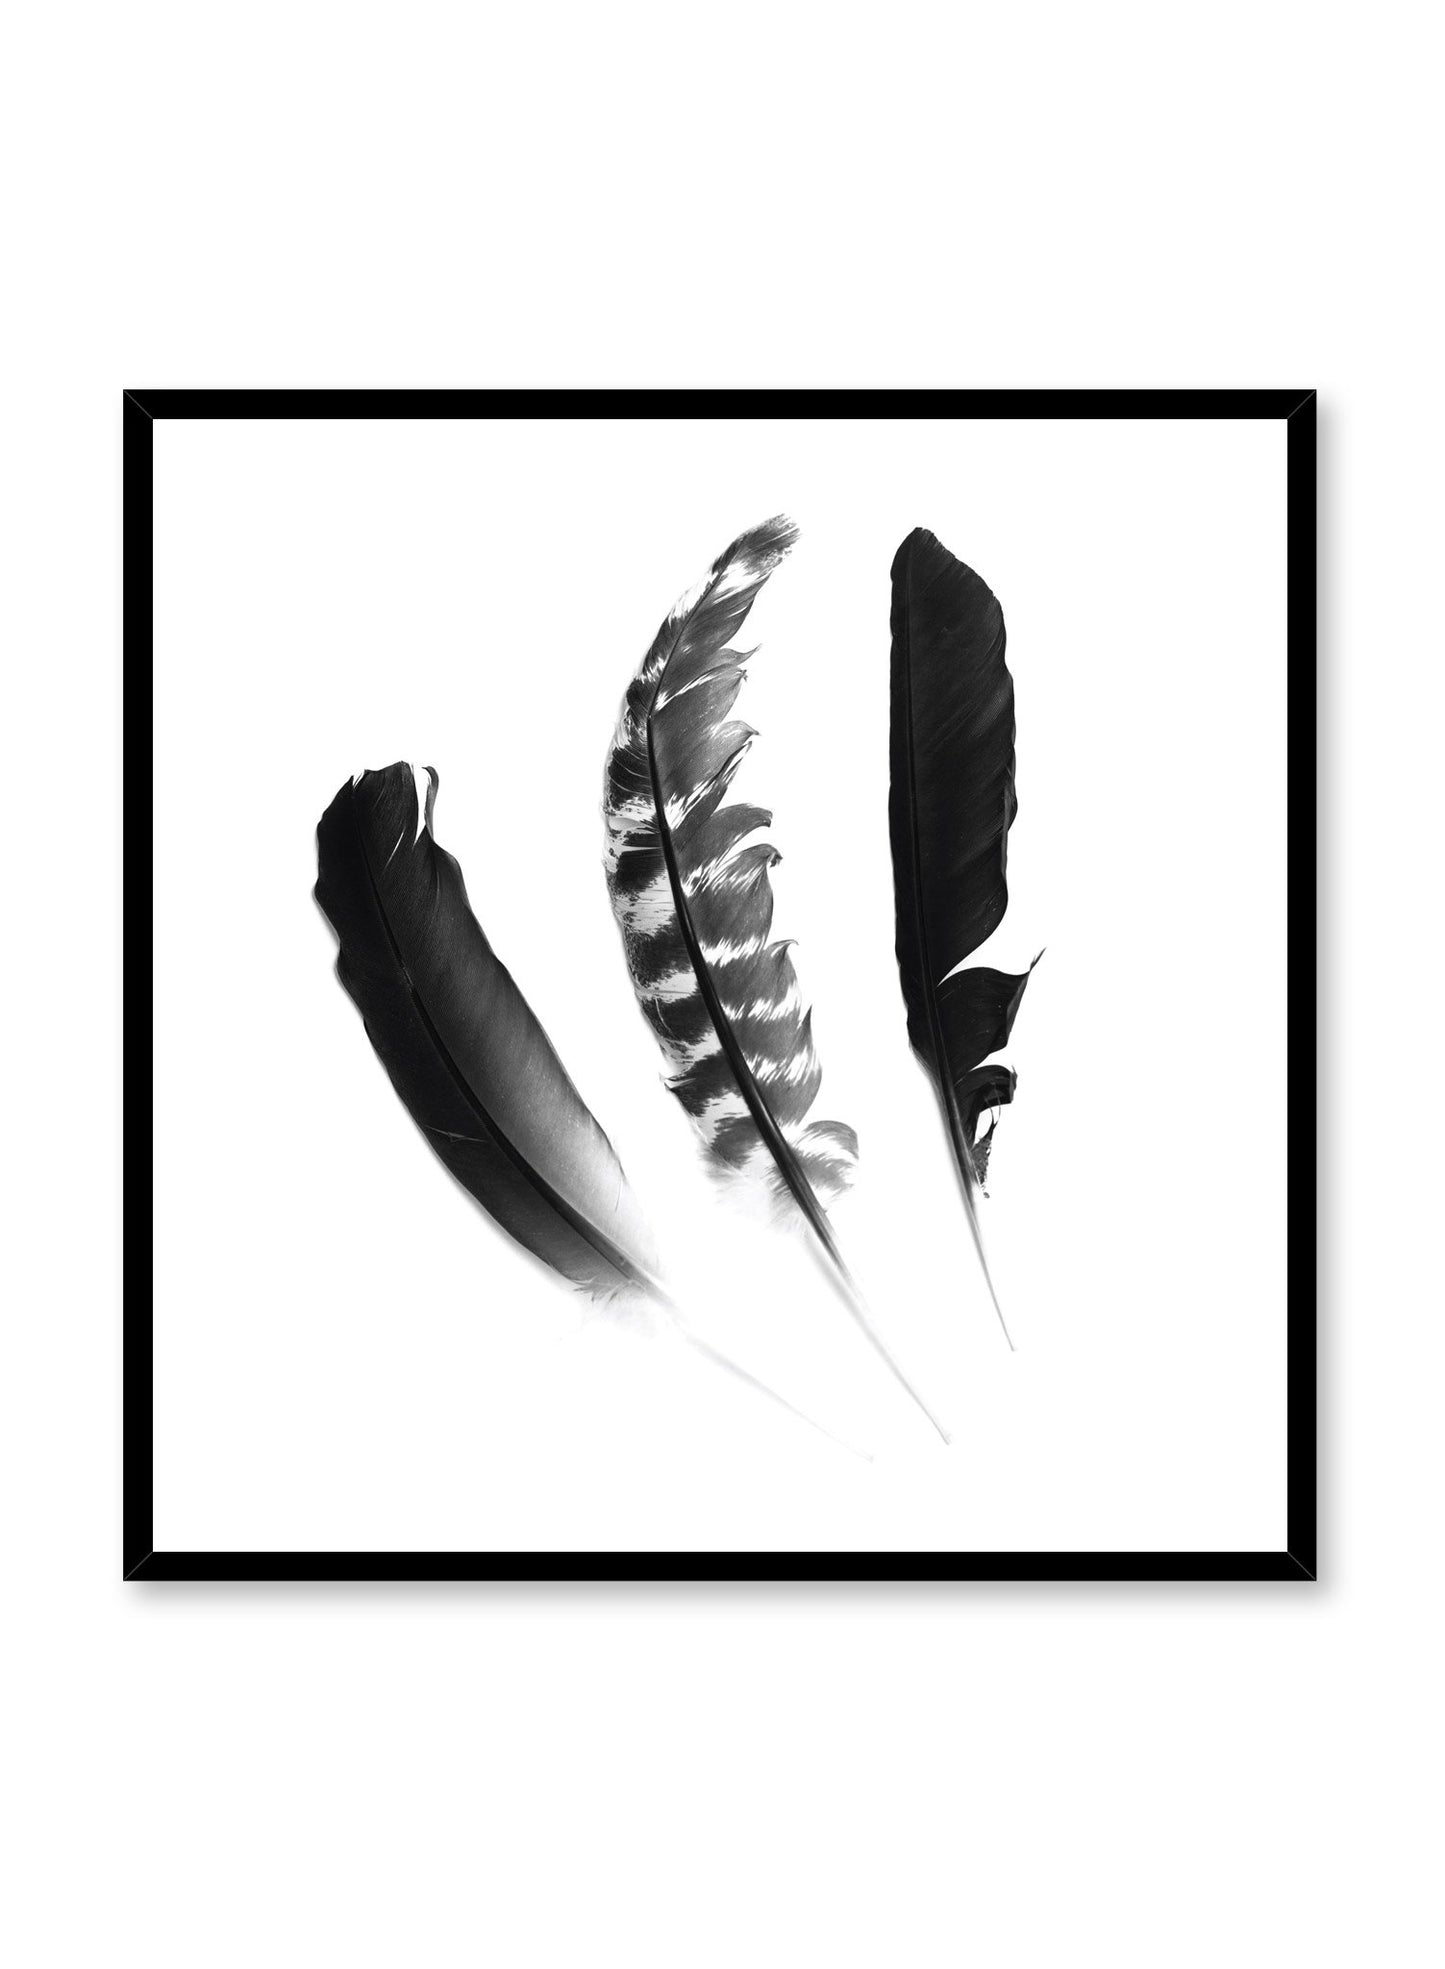 Minimalist black and white photography poster by Opposite Wall featuring a Chic Trio of feathers in square format